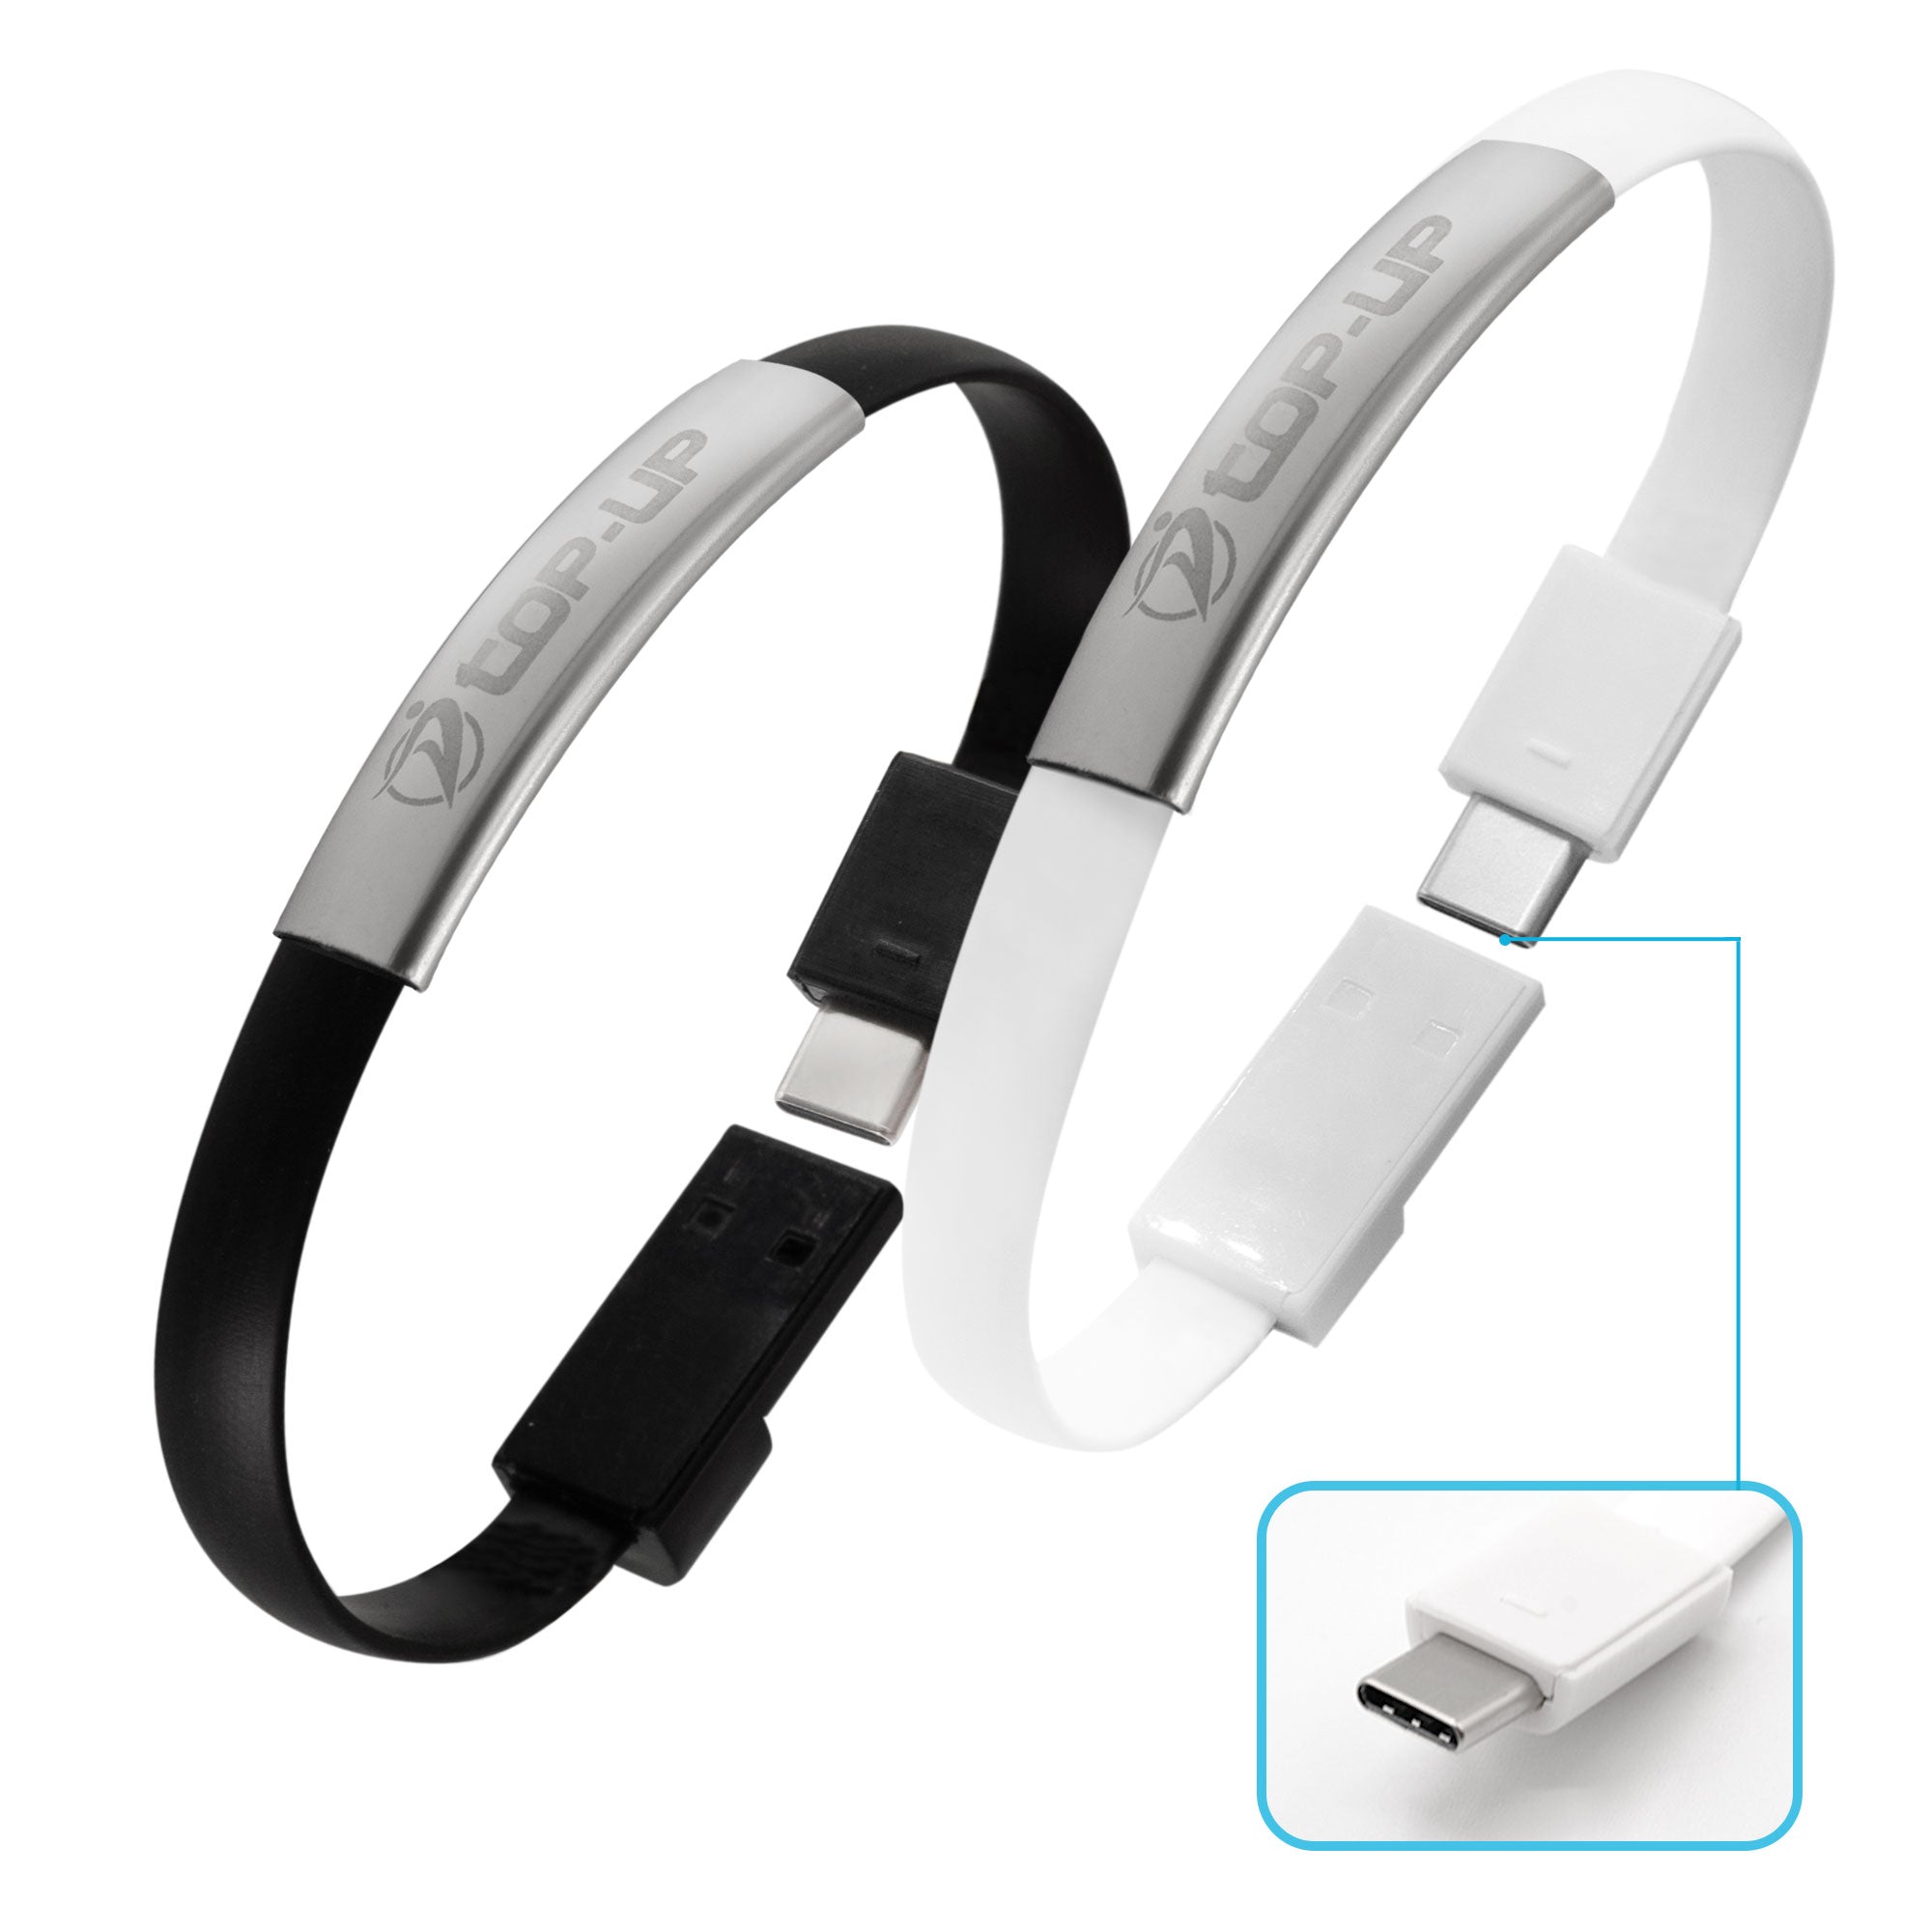 USB Bracelet Roundup - The Coolest Values in USB Wristband Tech Now